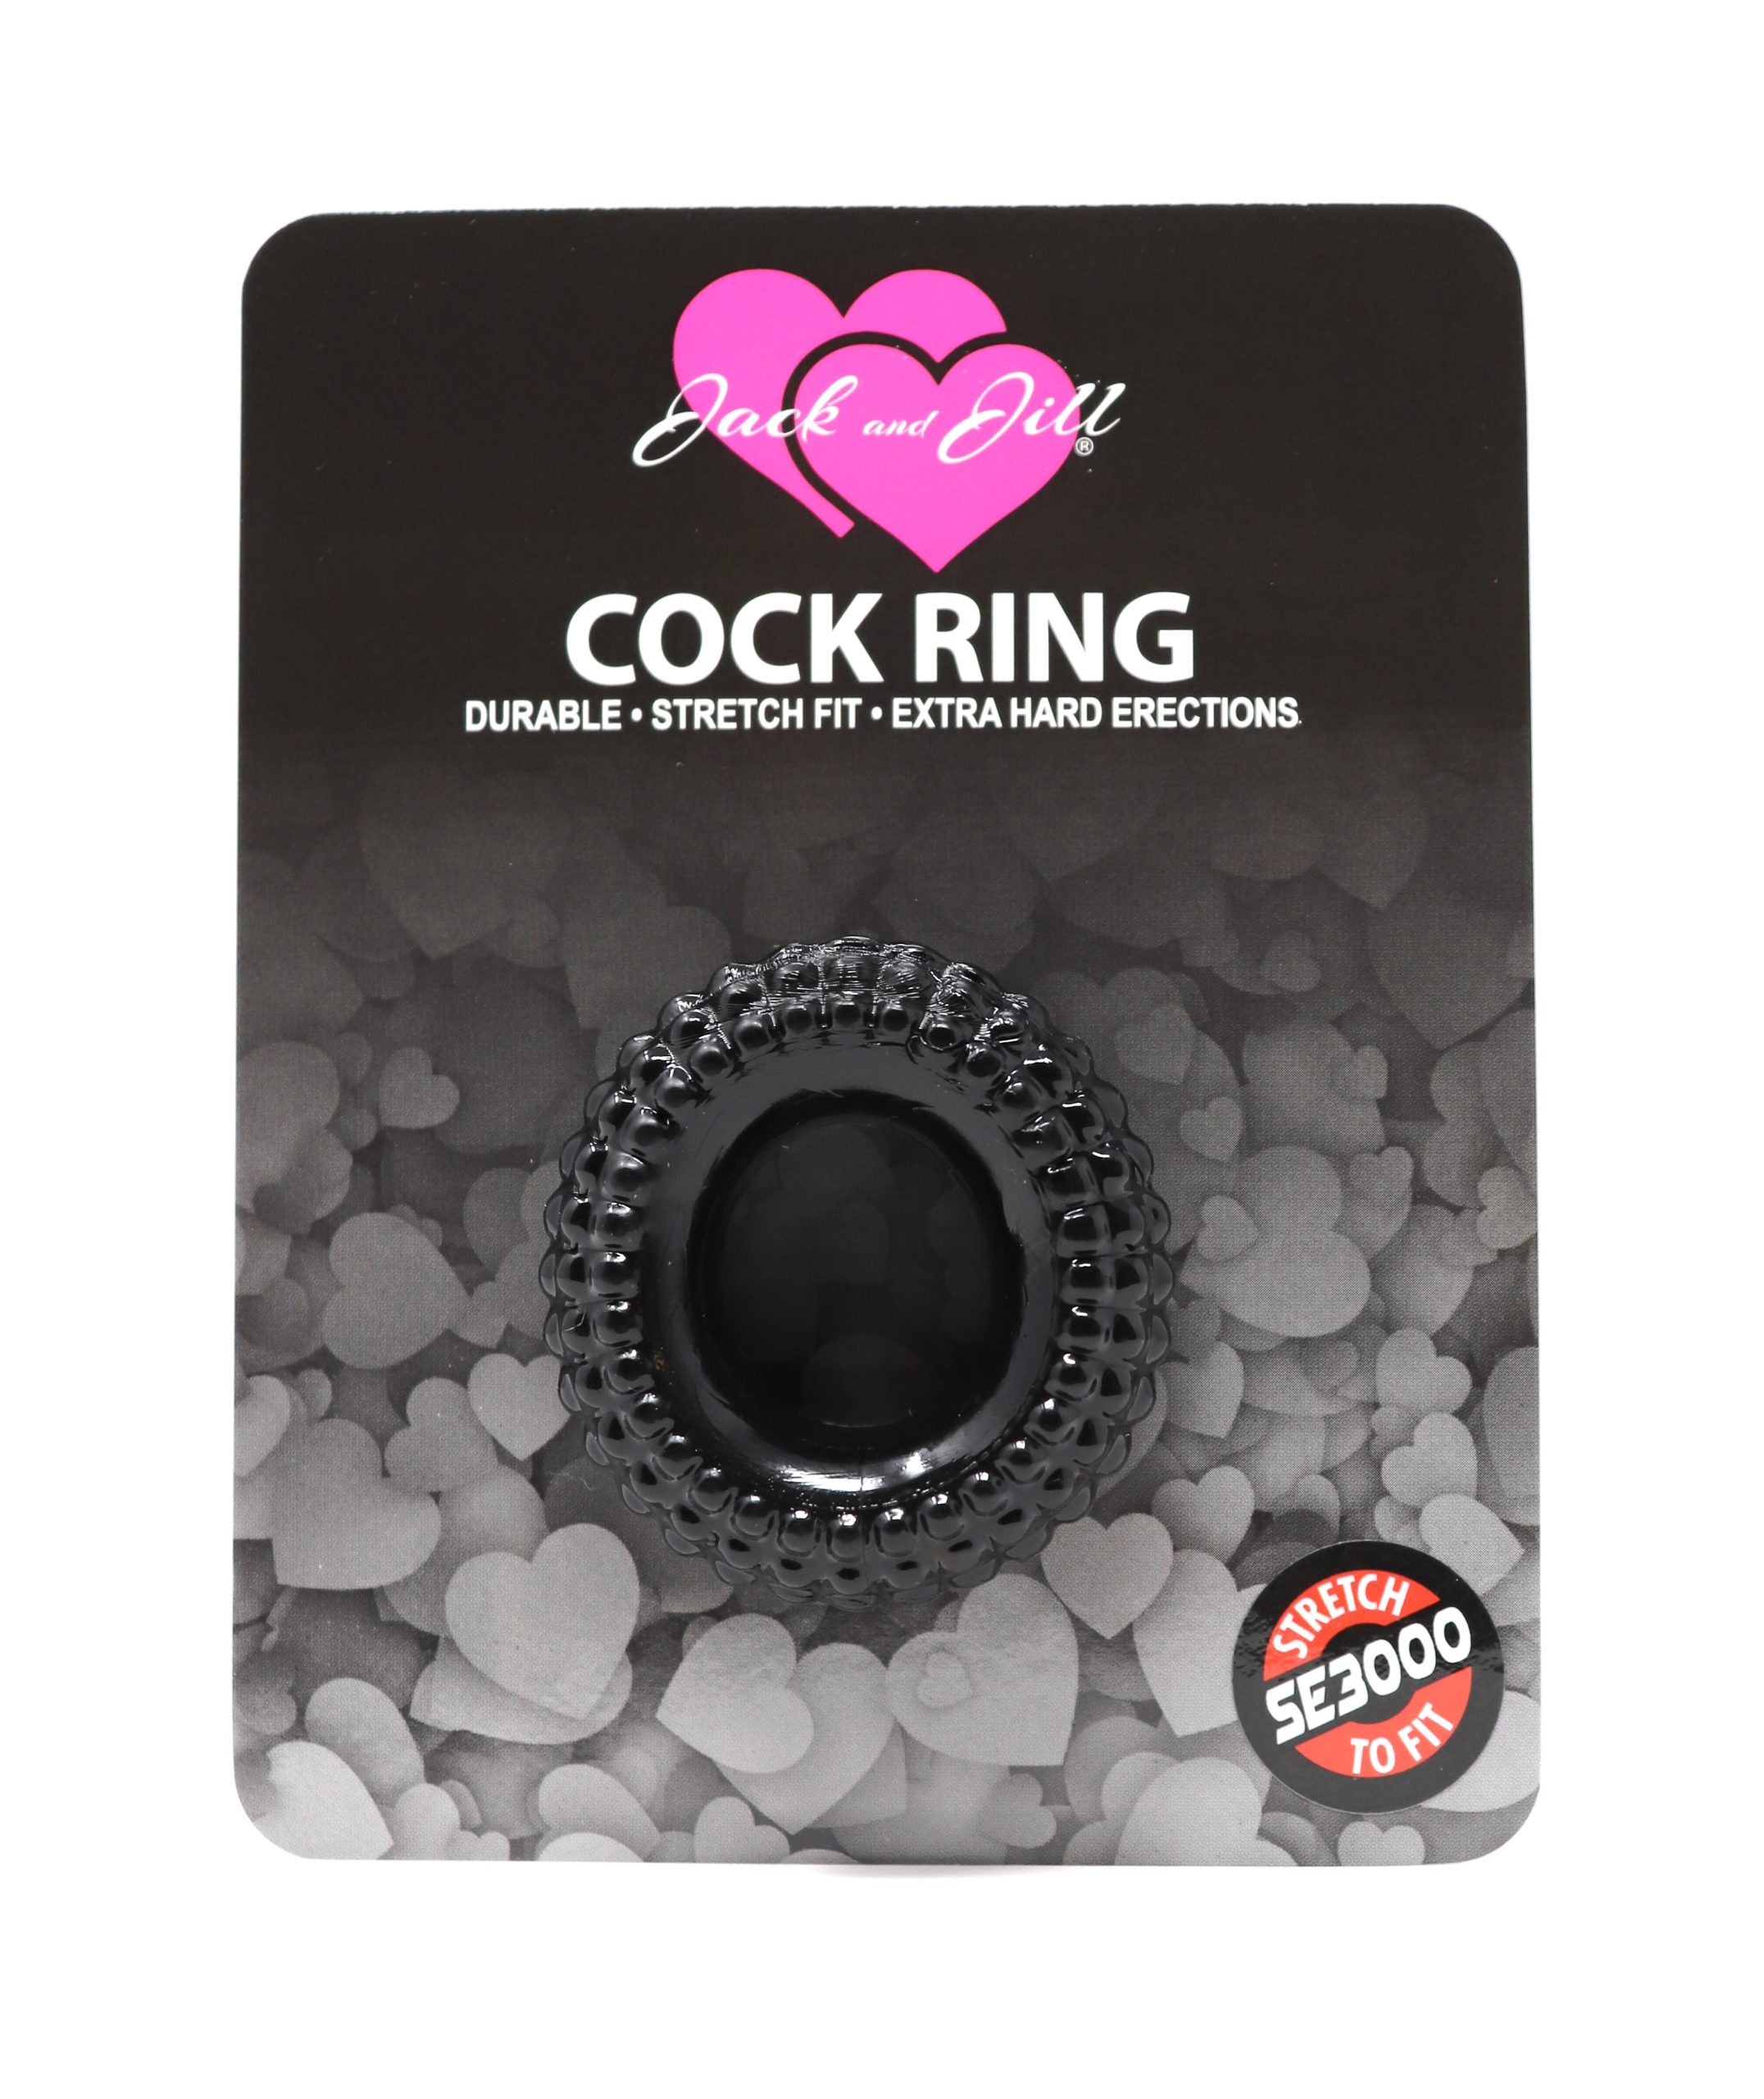 Jack and Jill Radial Black cock ring